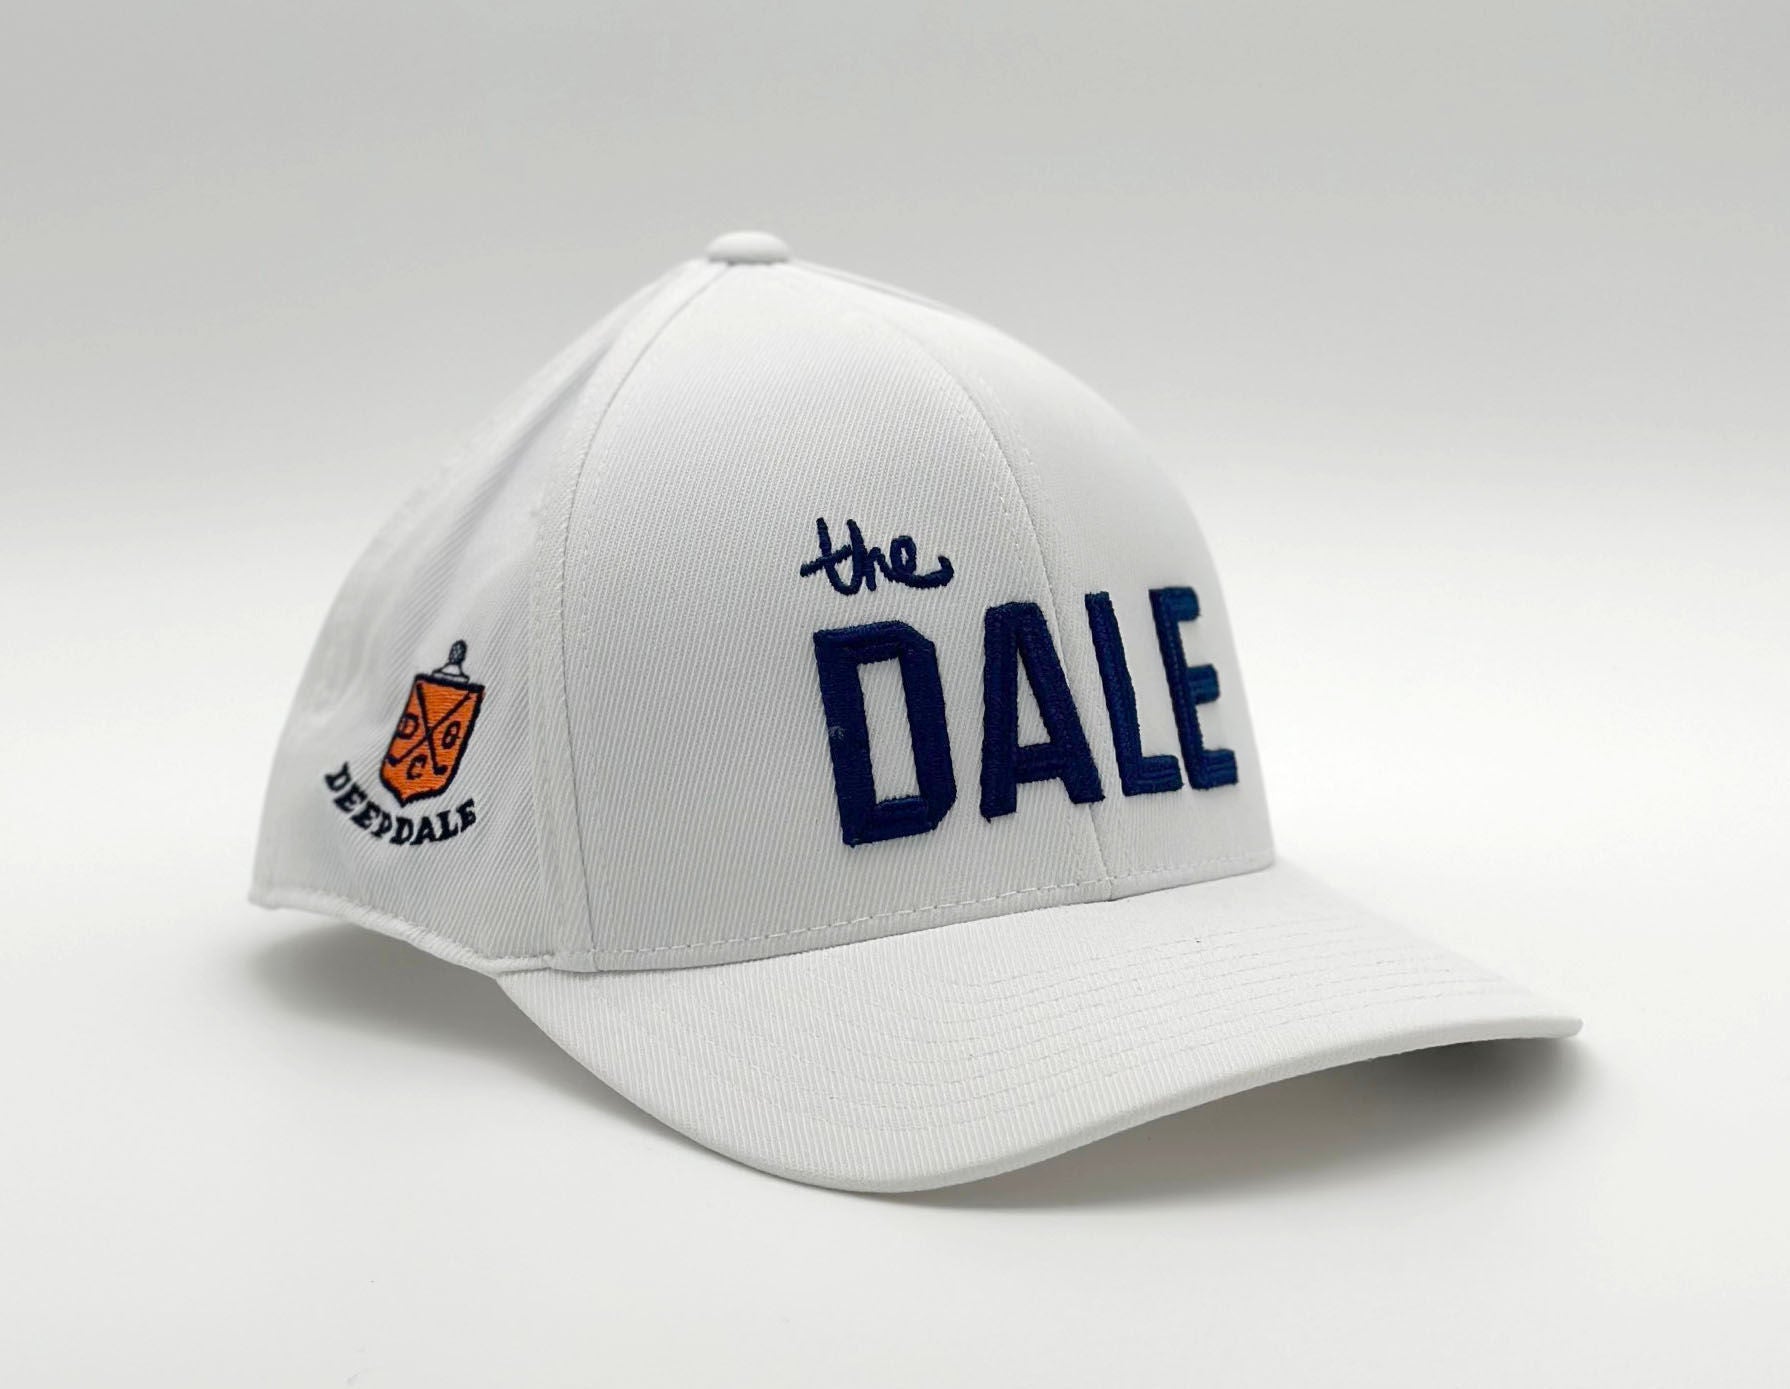 The Dale G4 Hat